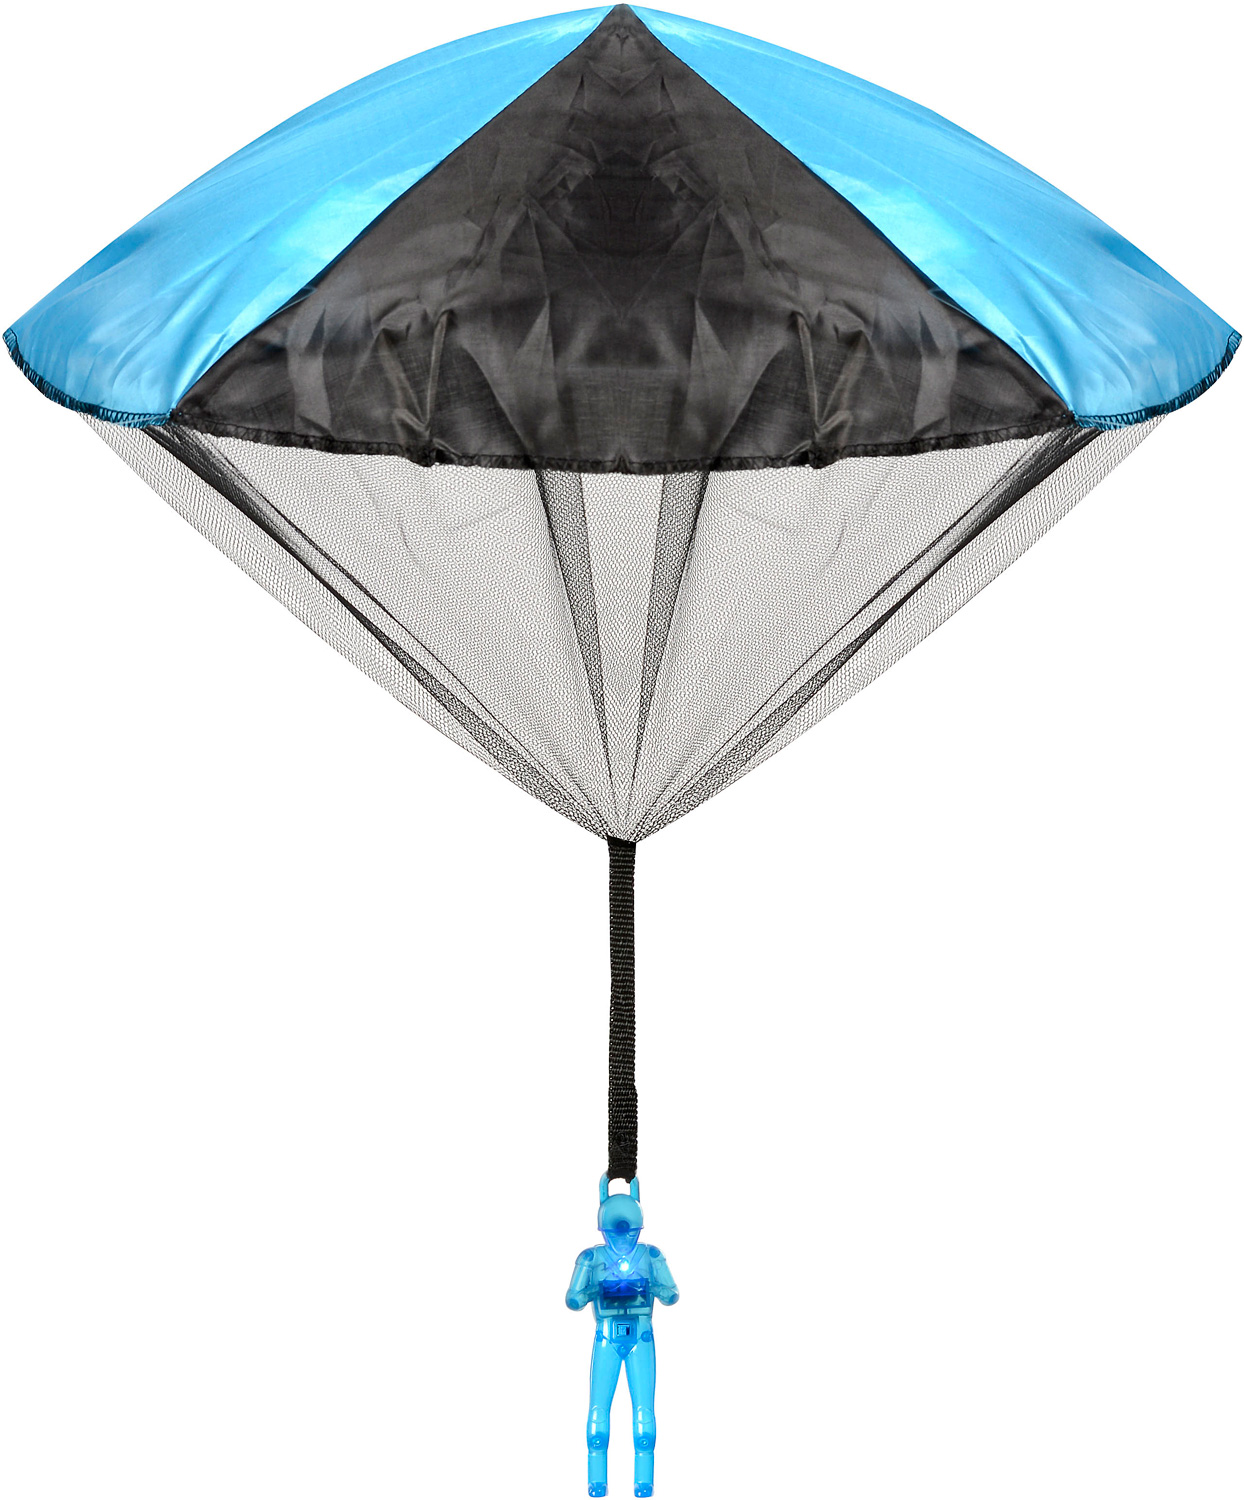 Toy Aeromax Original Tangle Parachute Has No Strings to & Requires for sale online 